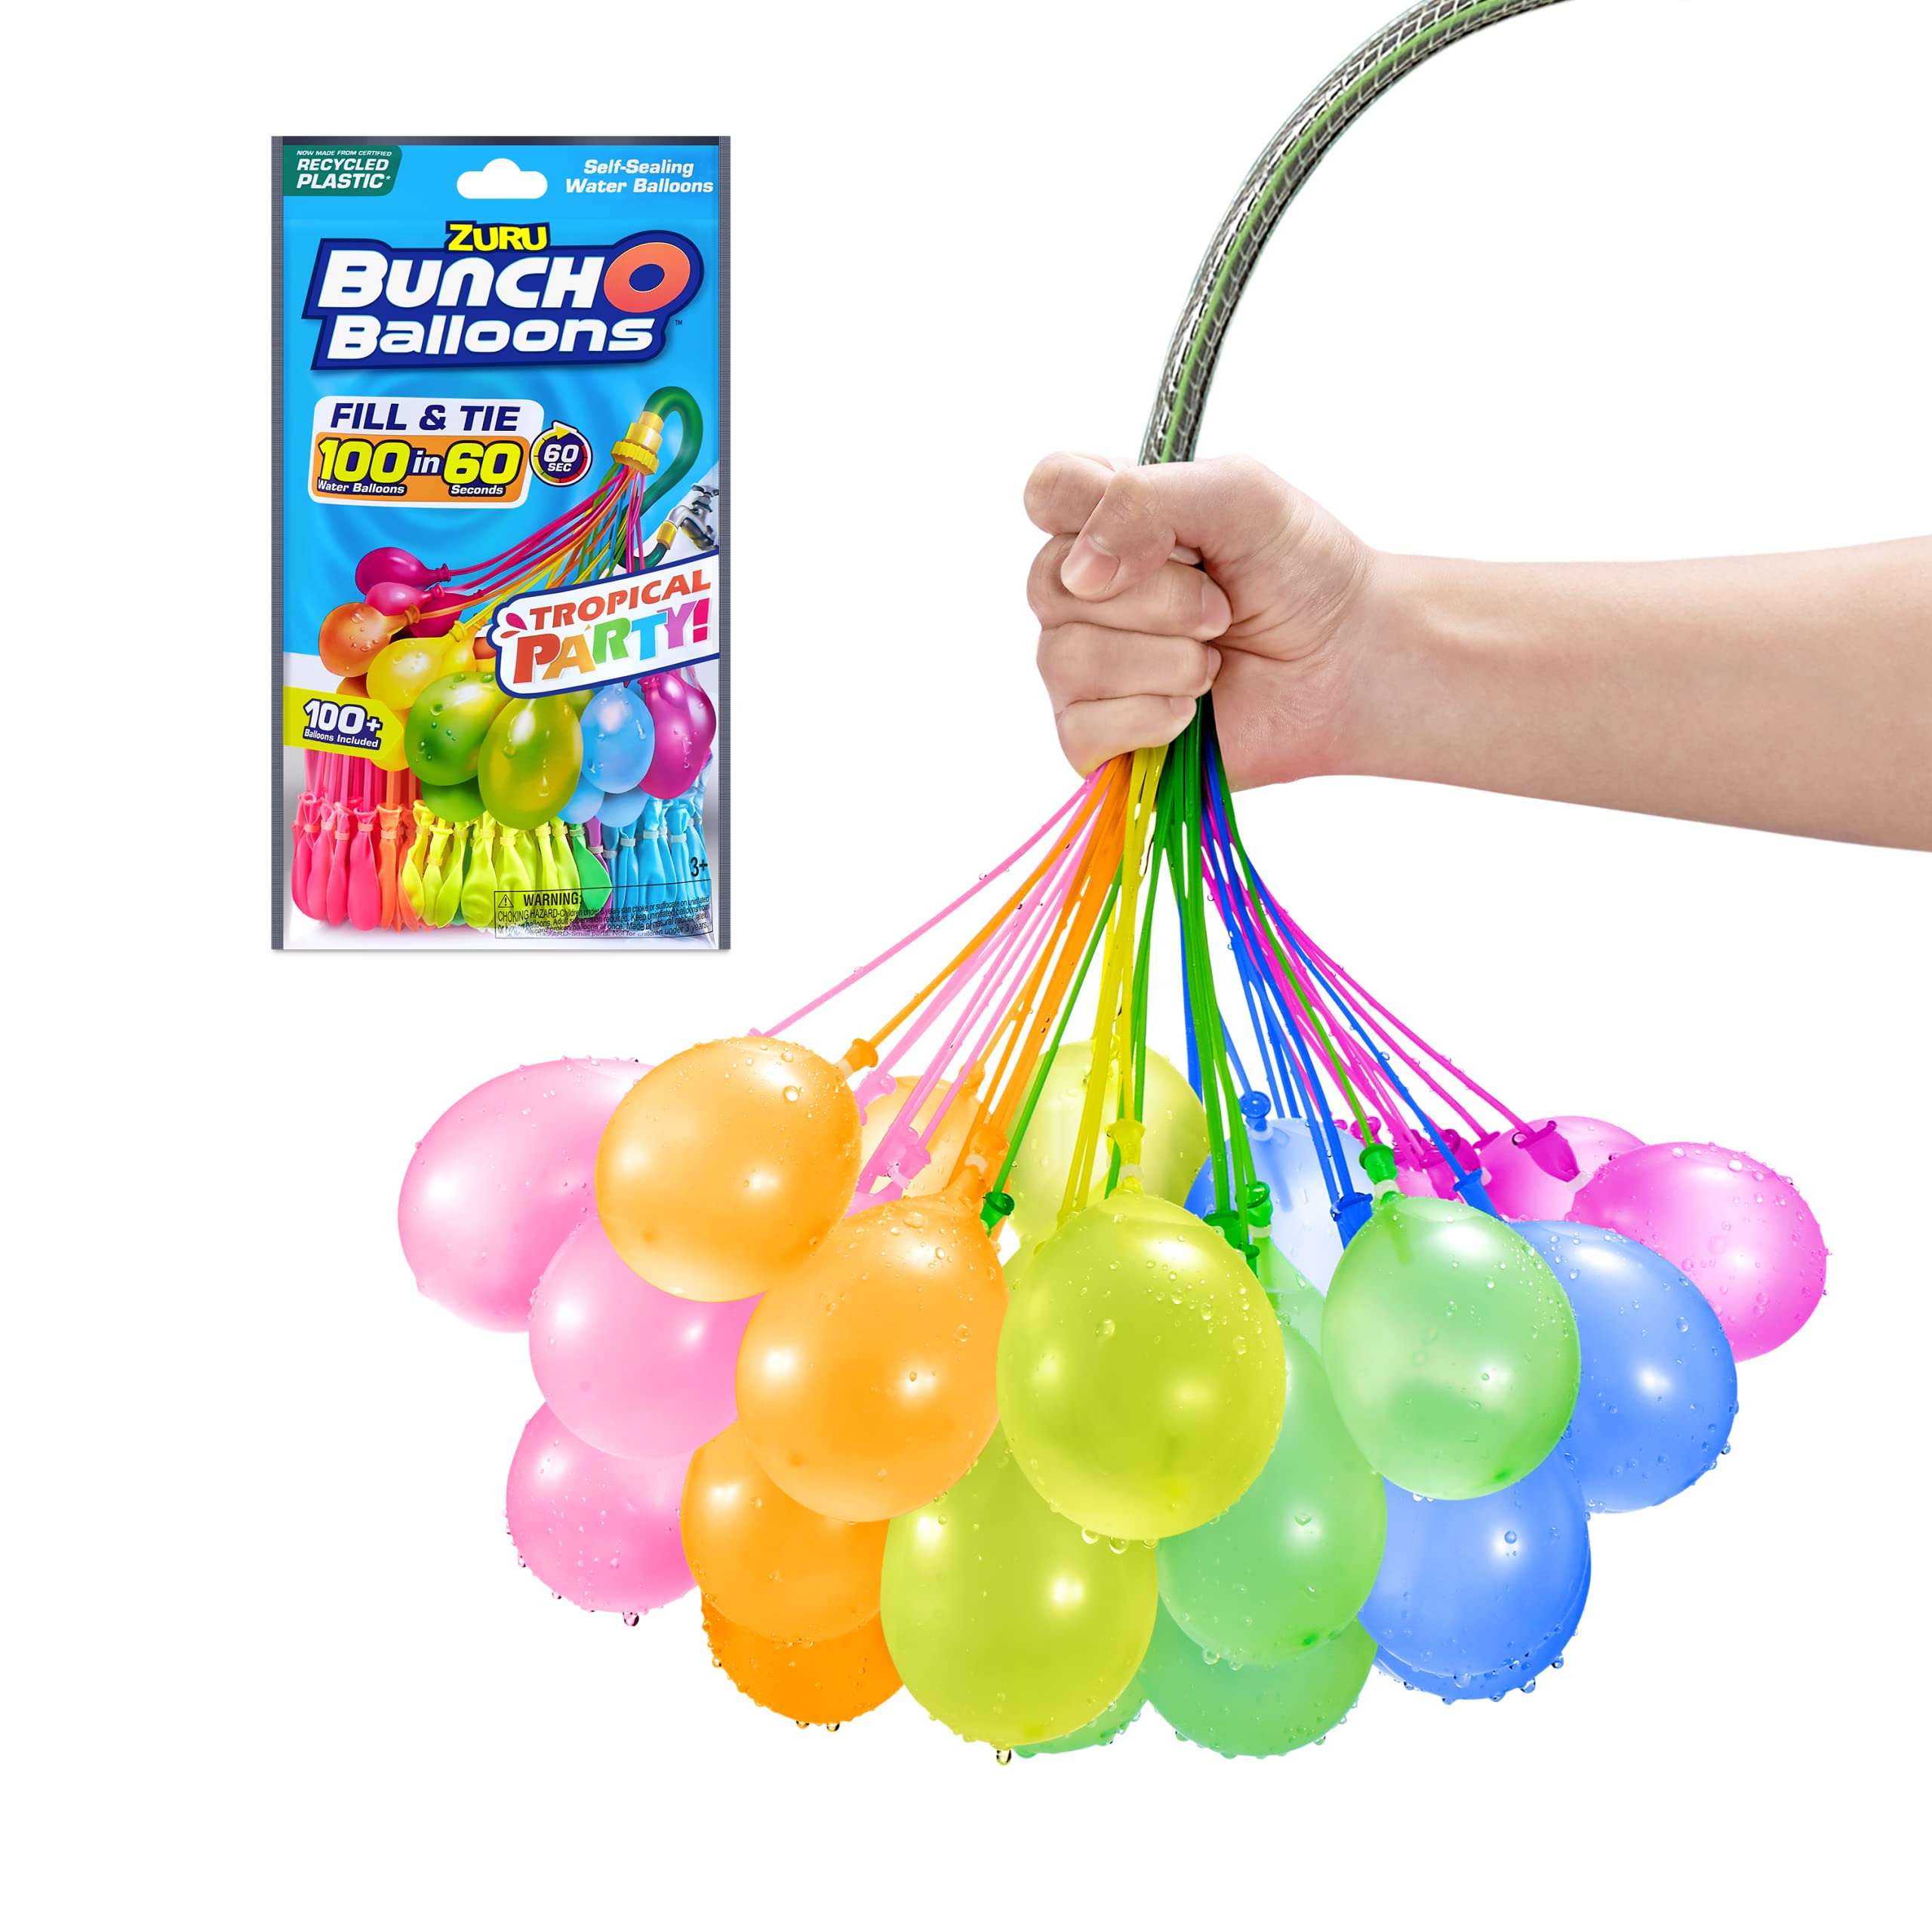 Bunch O Balloons Tropical Party (3 Pack) by ZURU, 100+ Rapid-Filling Self-Sealing Tropical Colored Water Balloons for Outdoor Family, Friends, Children Summer Fun (3 Pack)